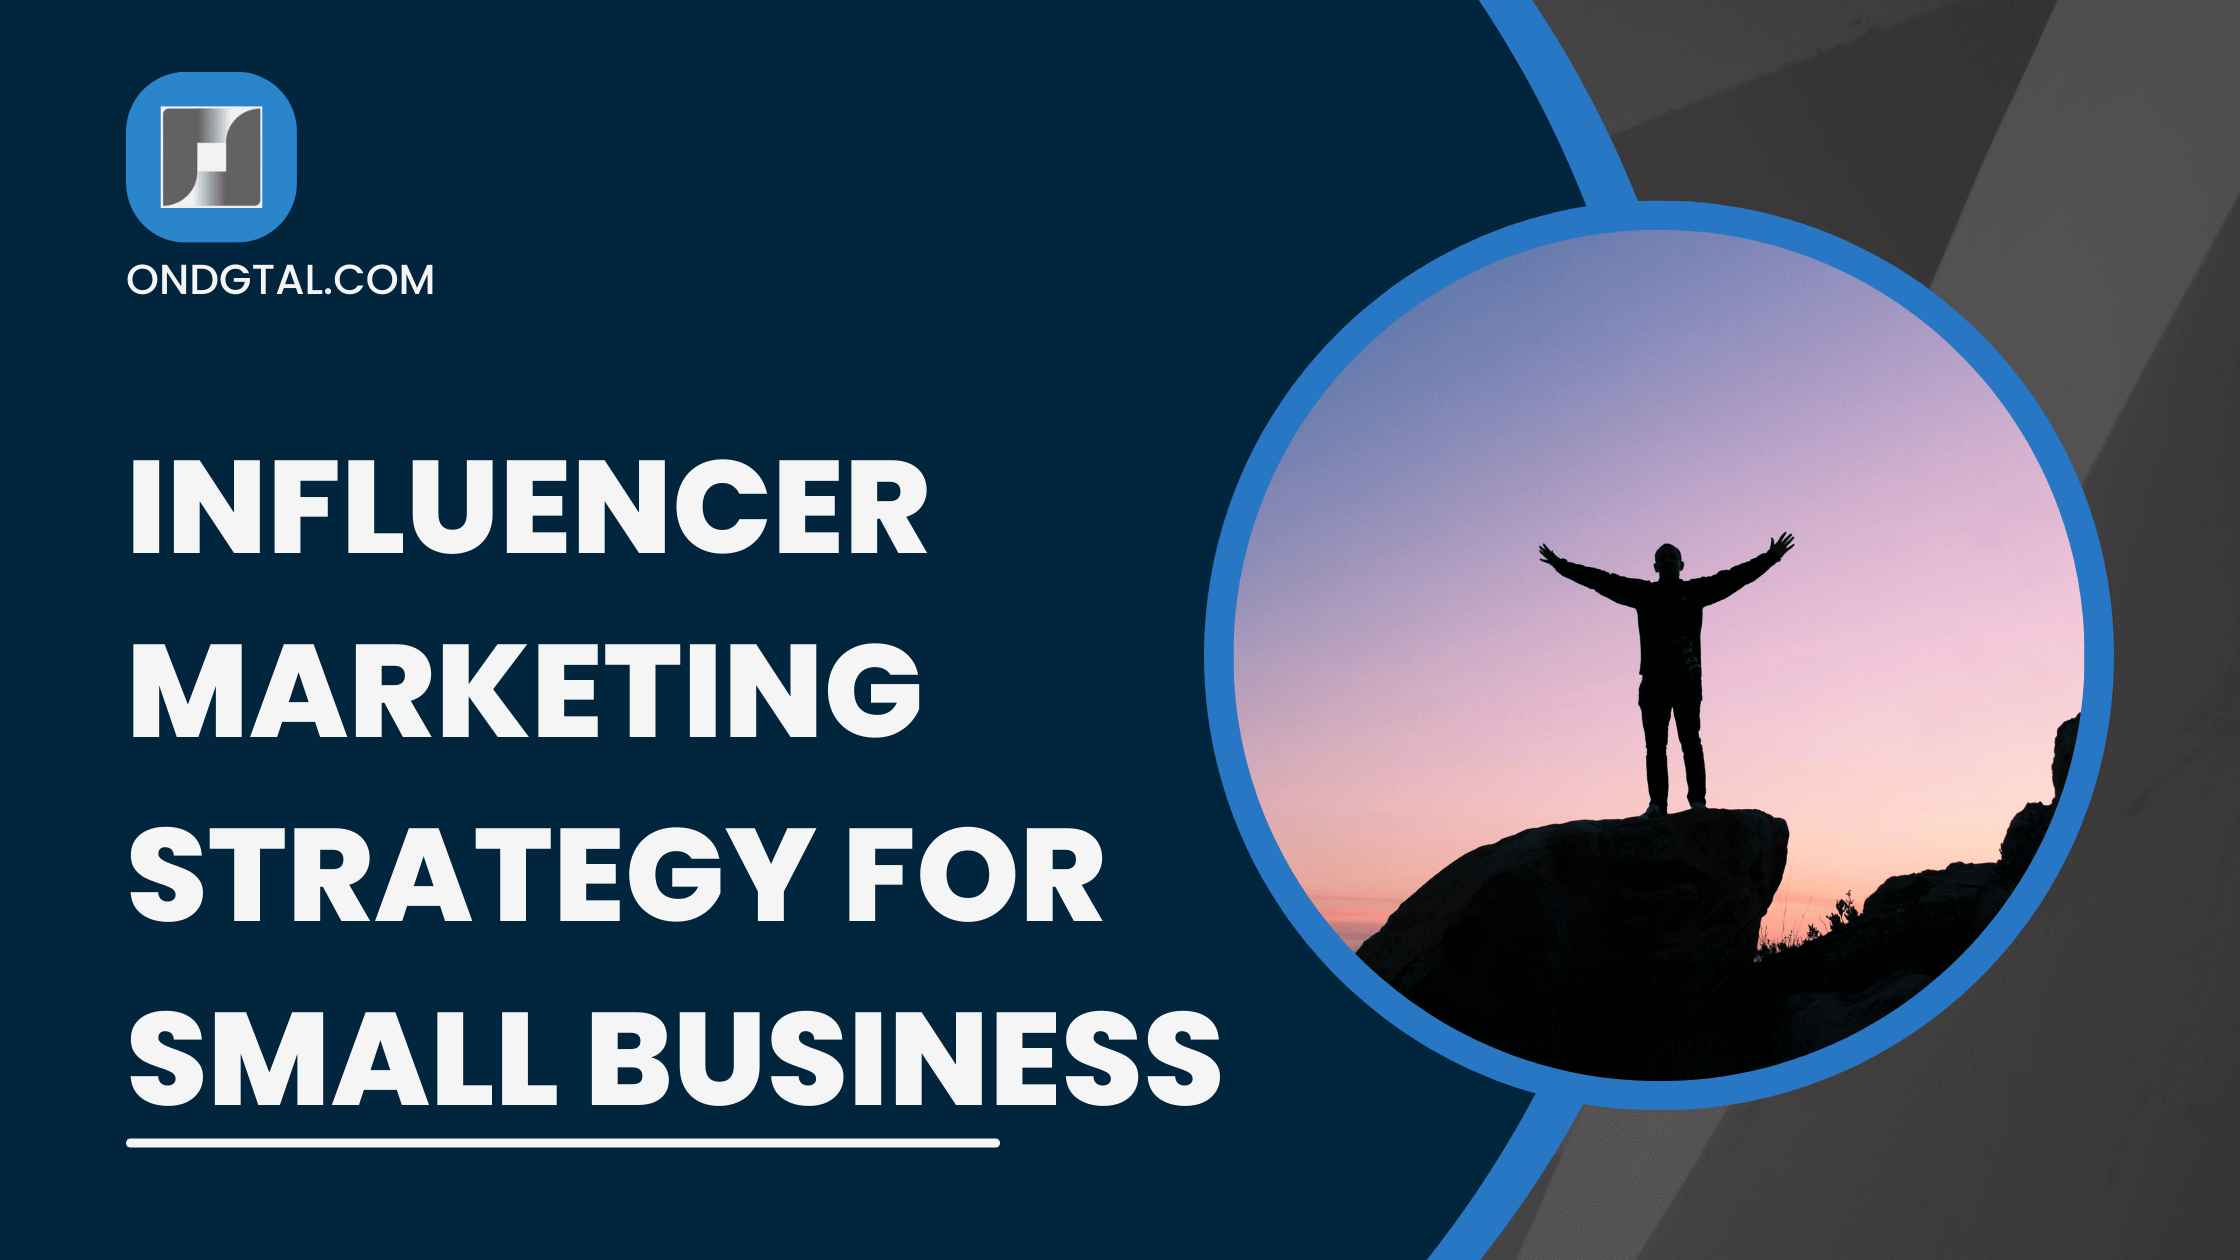 Influencer Marketing Strategy for Small Business